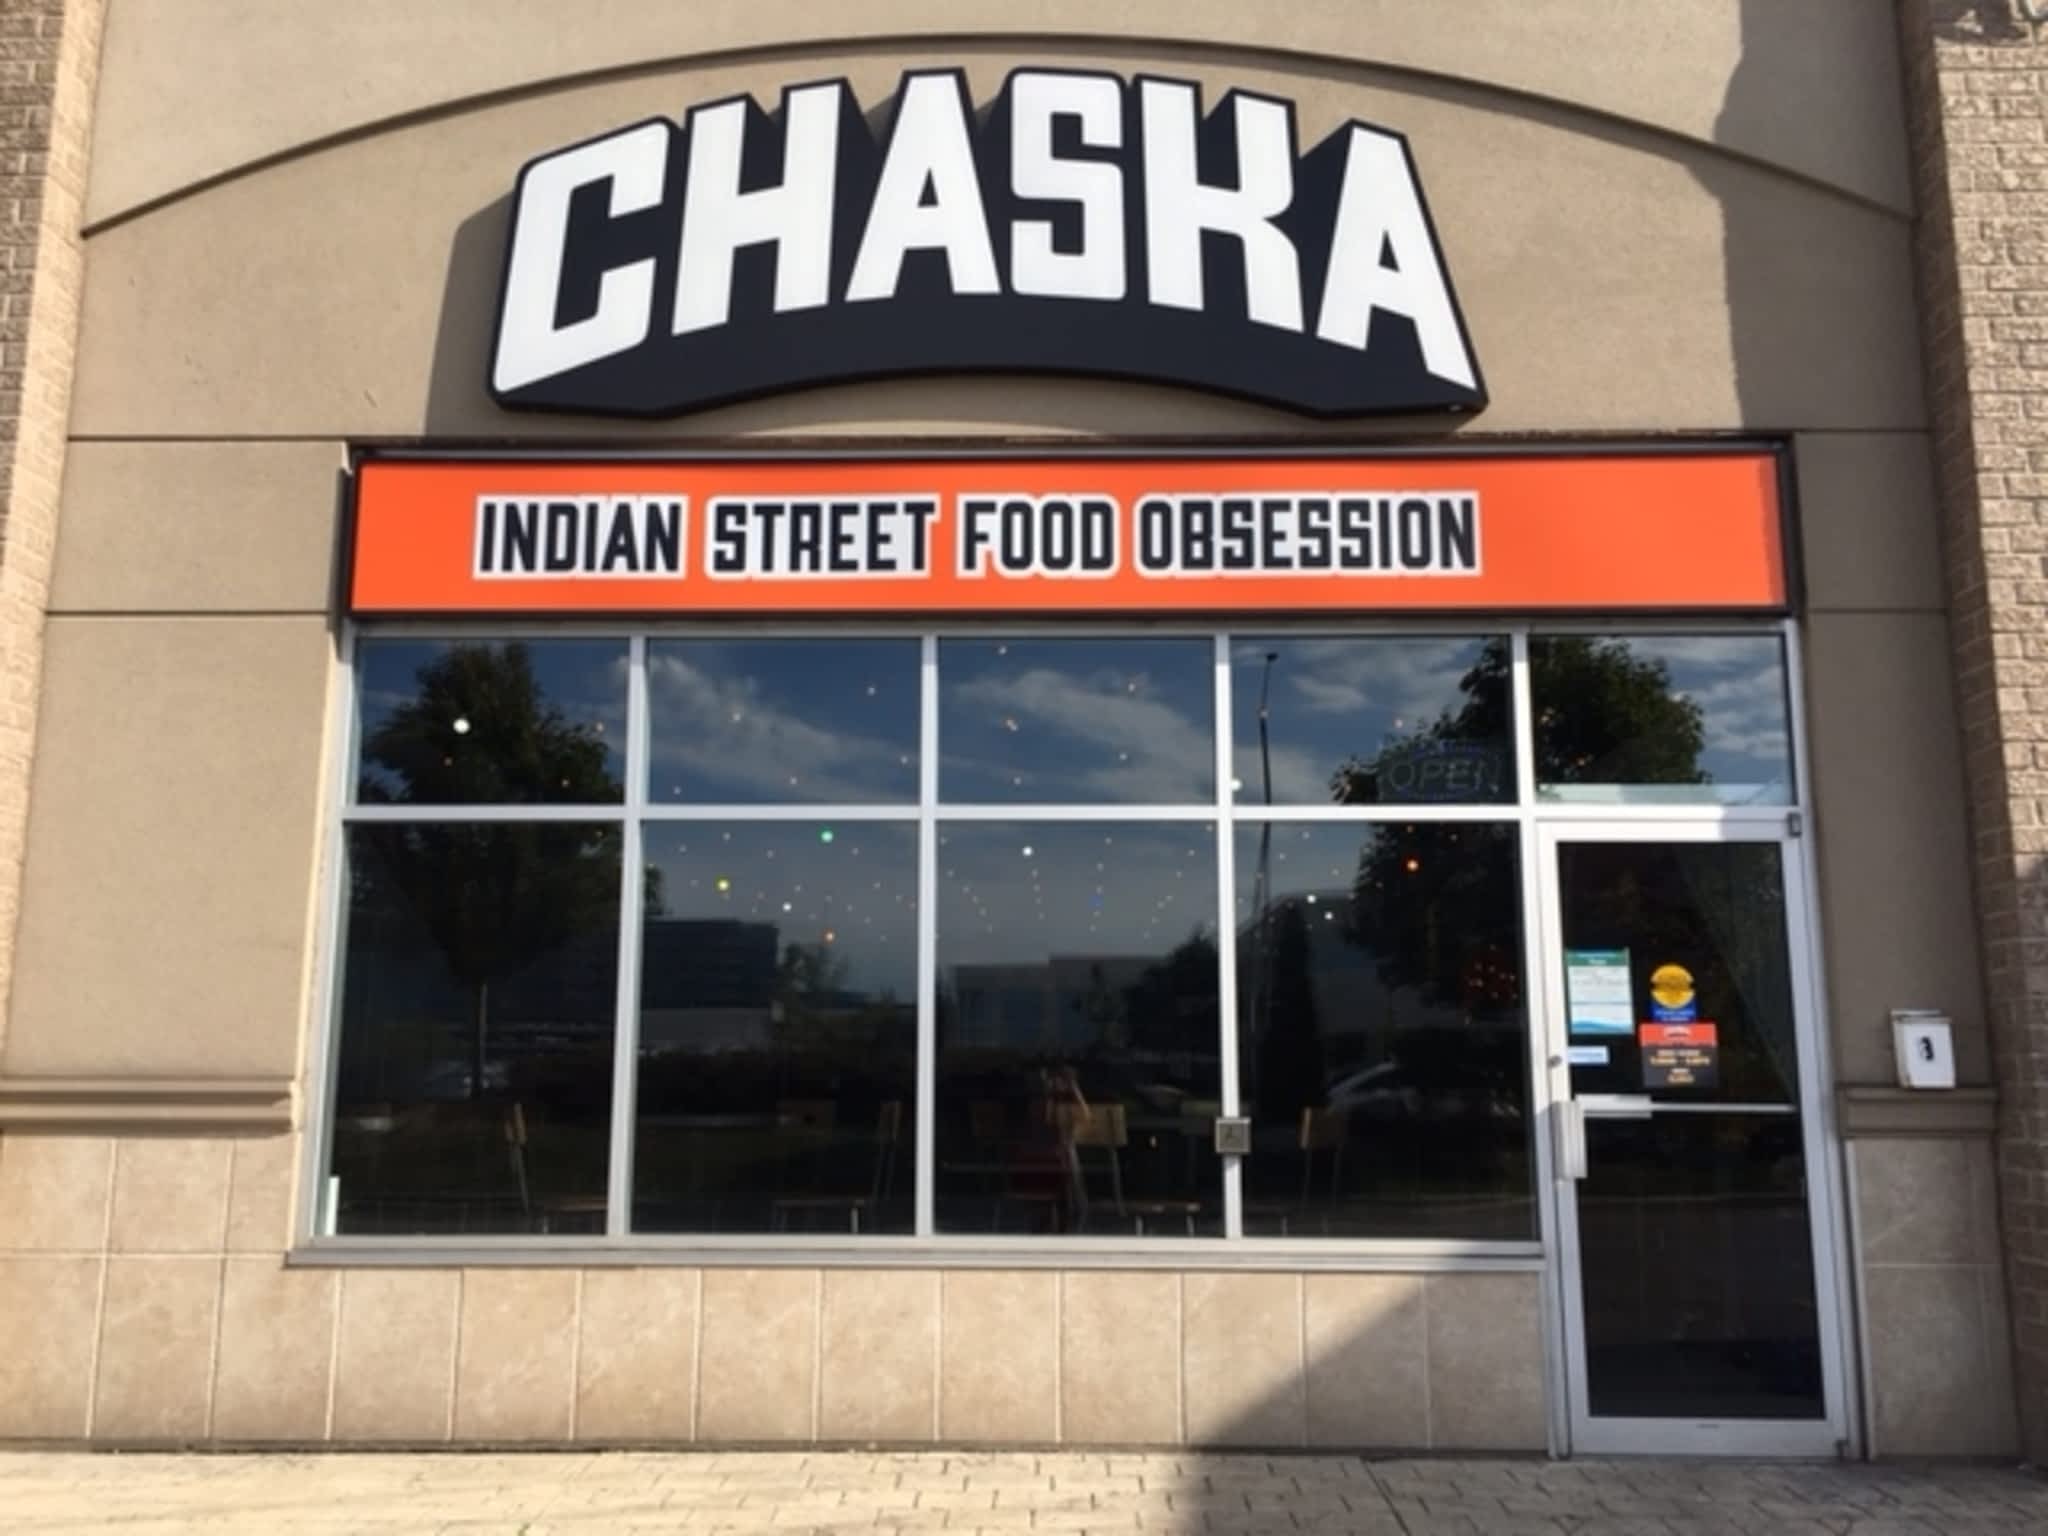 photo Chaska Indian Street Food Obsession